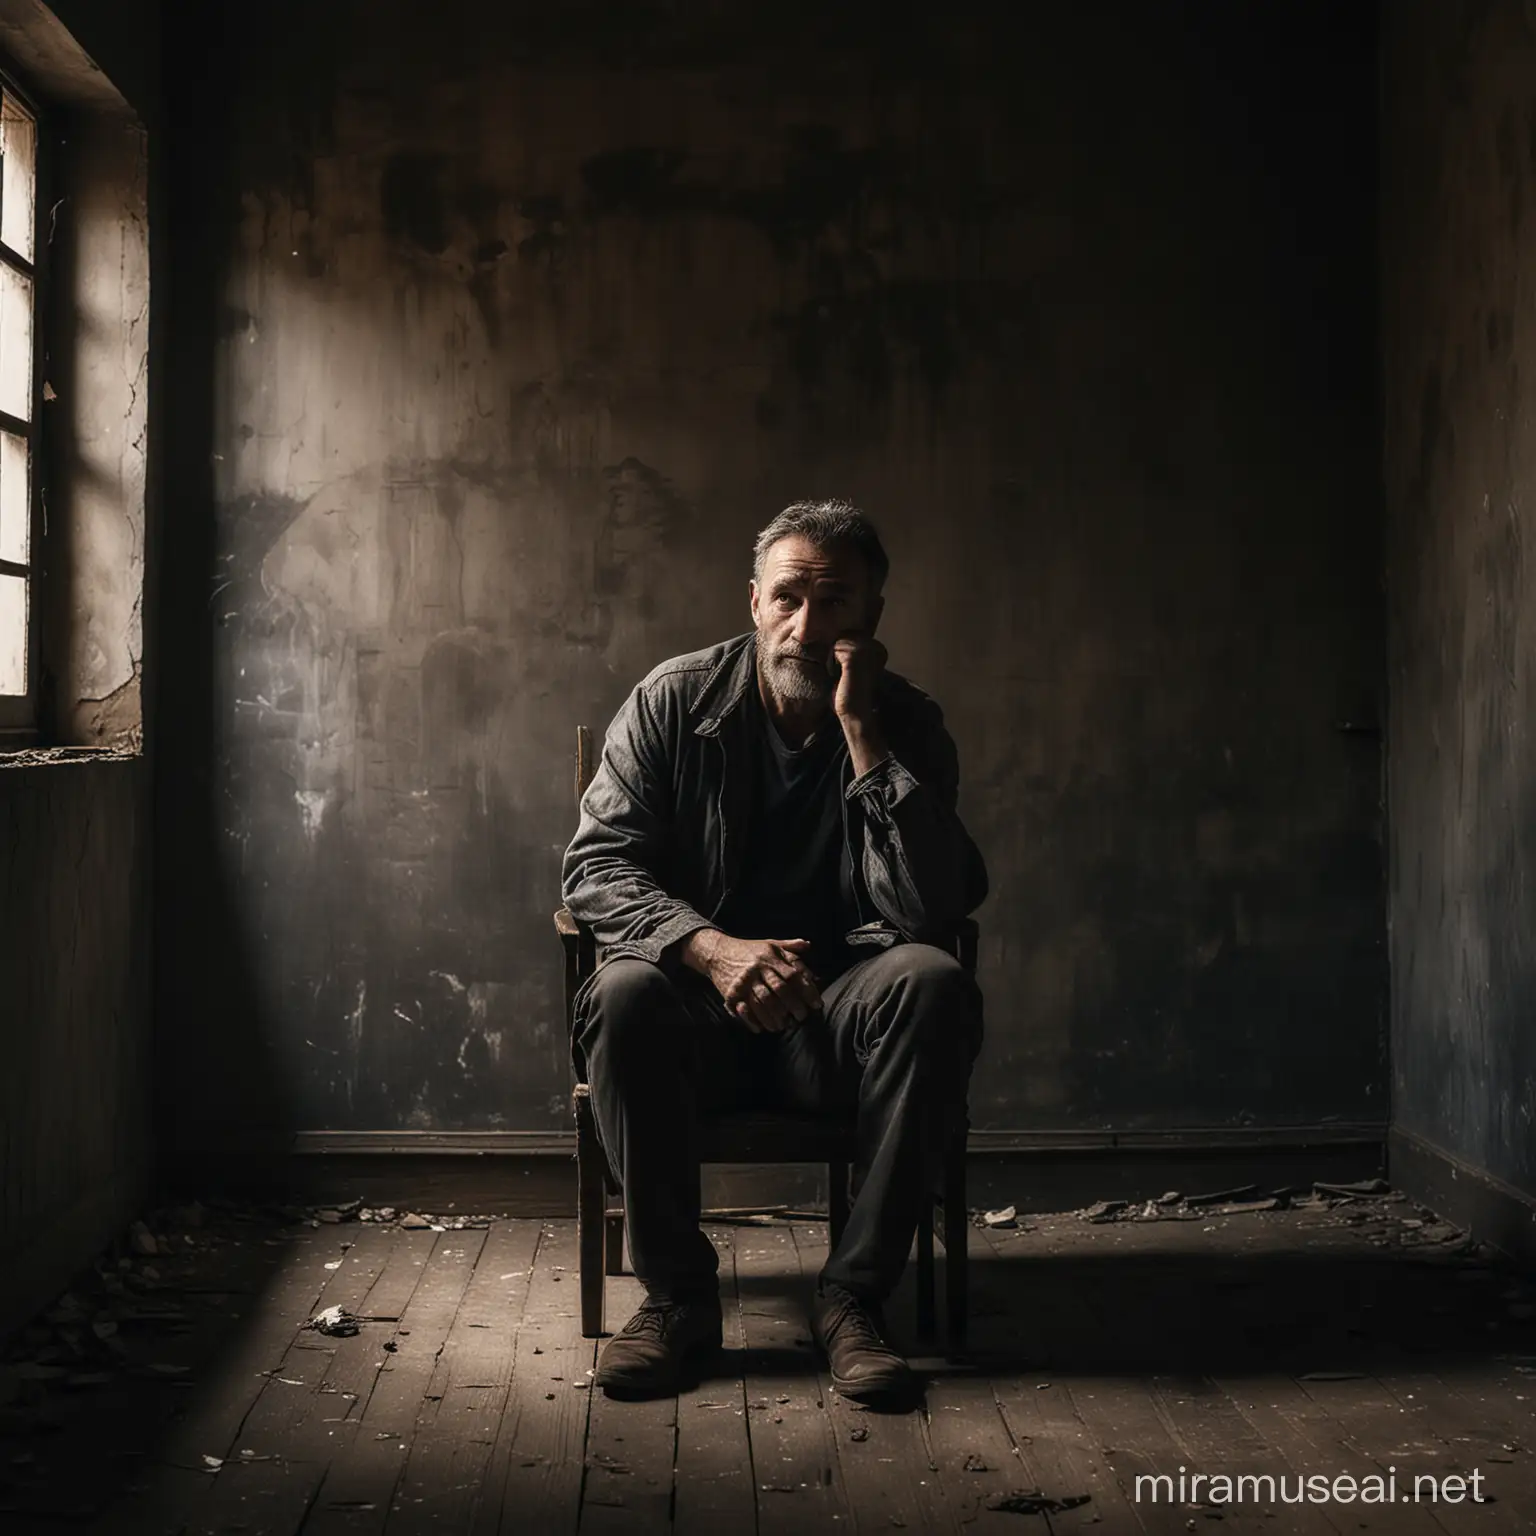 Lonely Man Sitting in Dimly Lit Room with Textured Walls